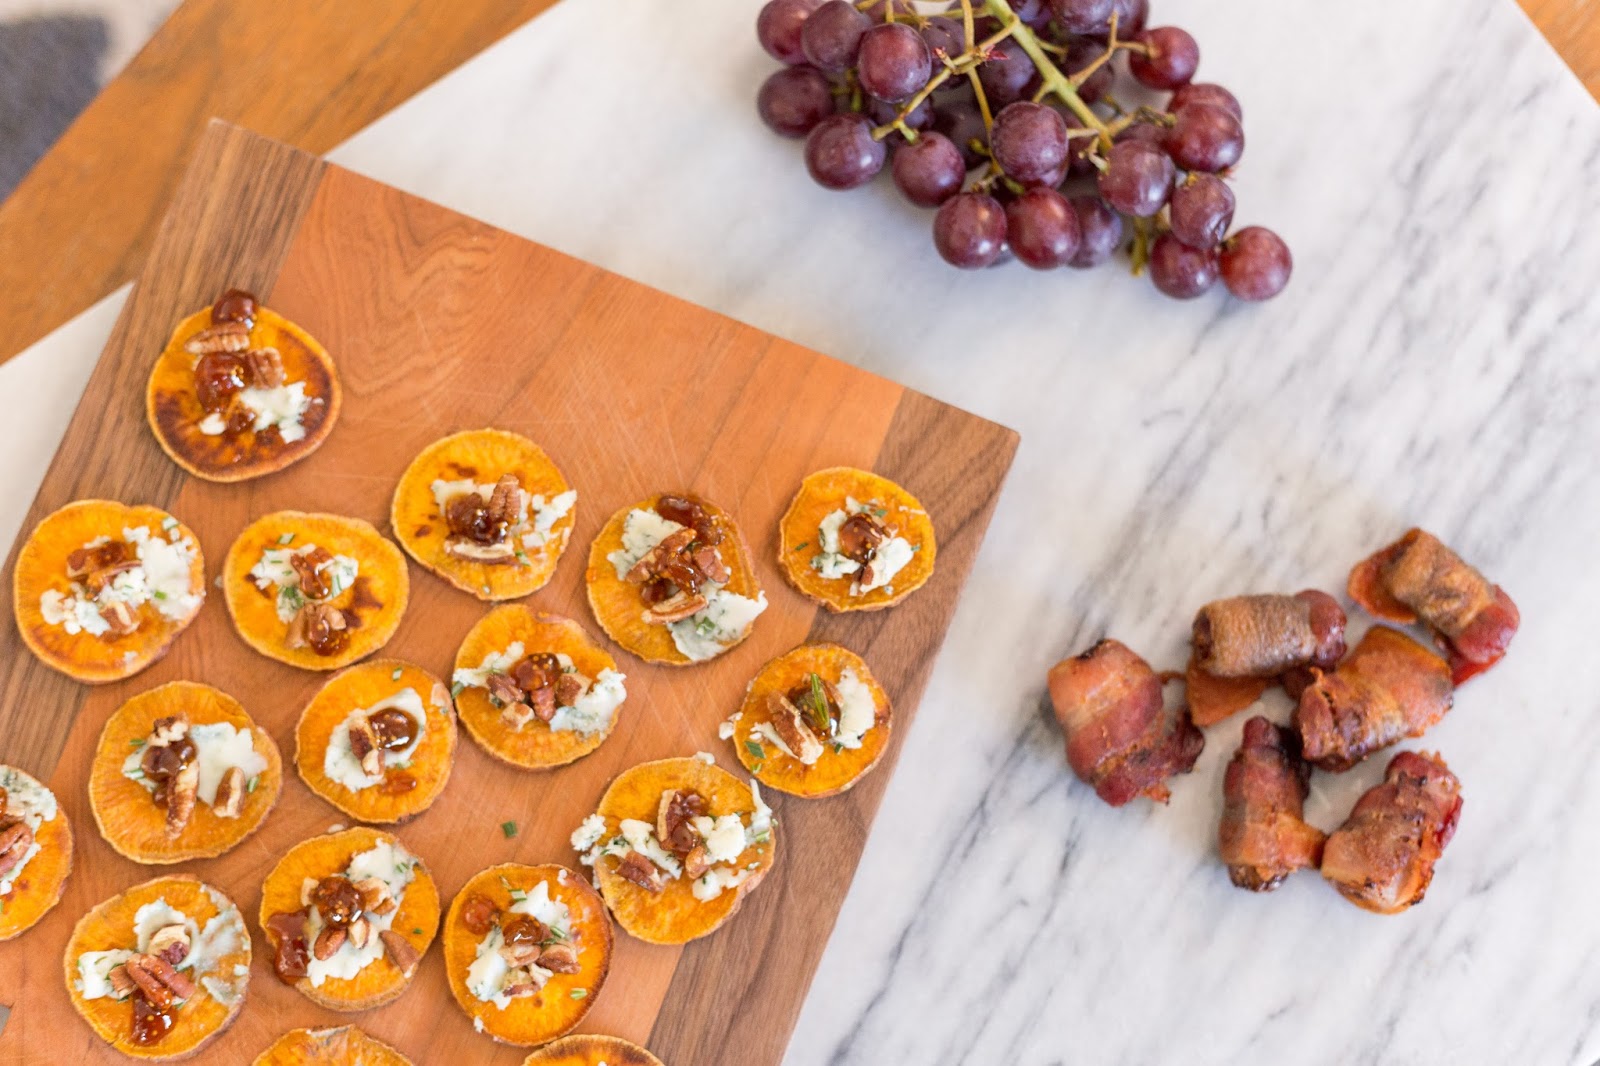 sweet potato crostinis with blue cheese, pecans, rosemary and fig spread!